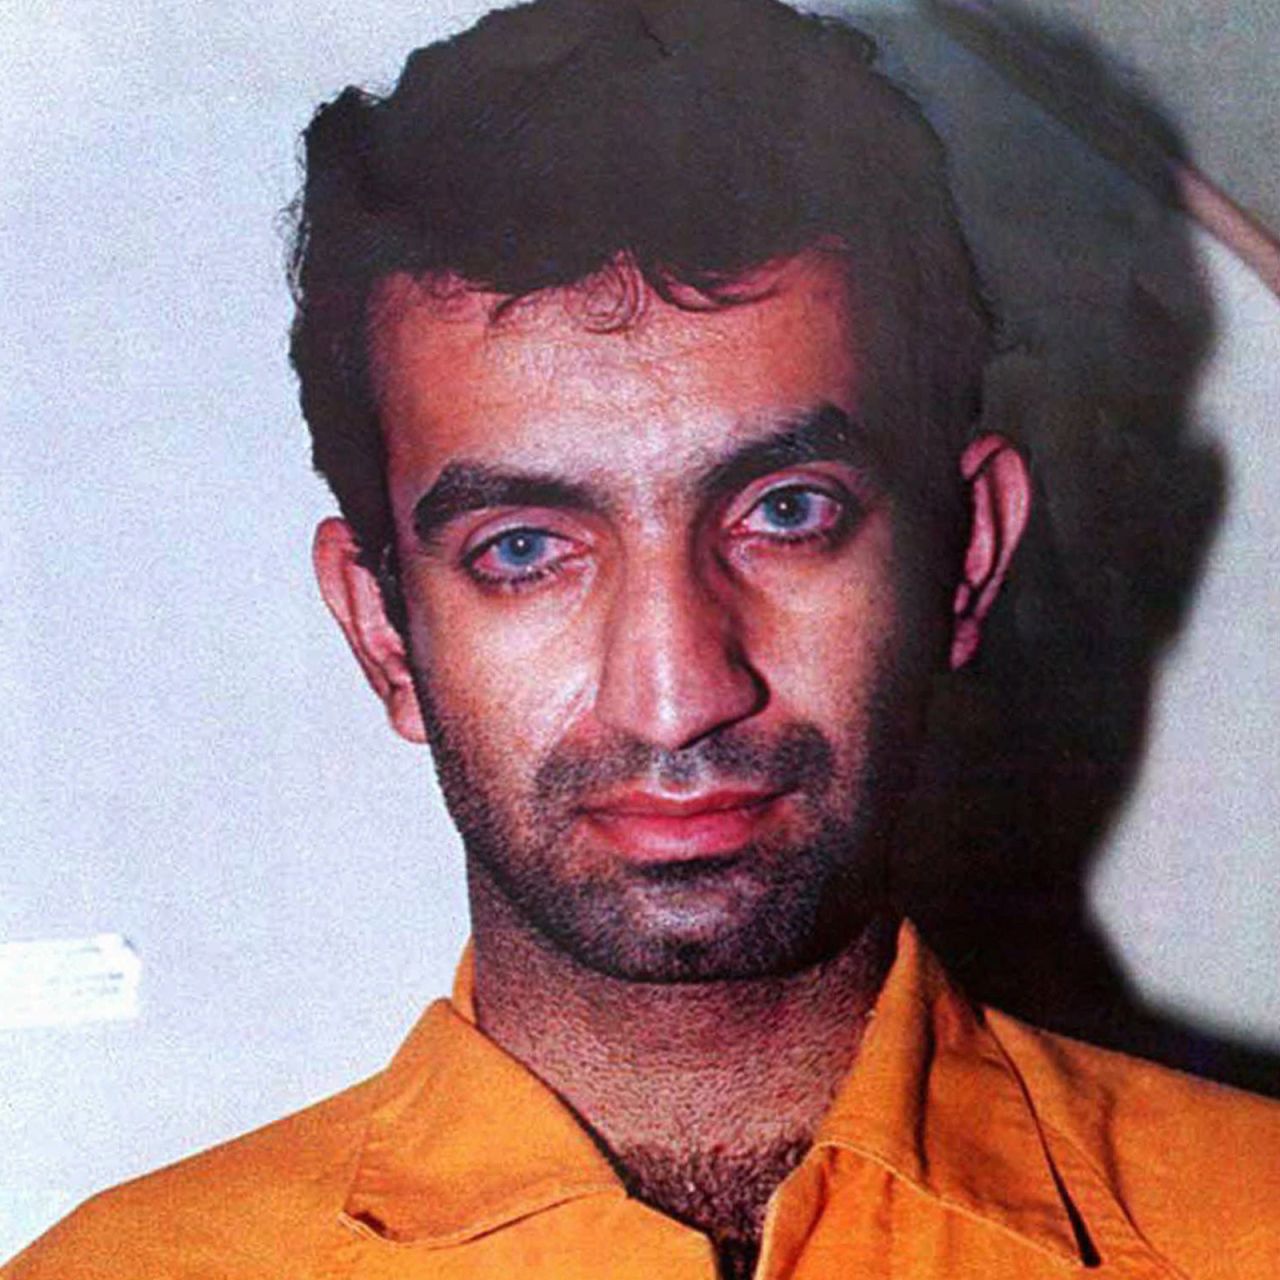 <a href="https://www.cnn.com/2013/11/05/us/1993-world-trade-center-bombing-fast-facts/index.html" target="_blank">Ramzi Yousef</a> was convicted in 1998 for his role in organizing the 1993 World Trade Center bombing, which killed six people and injured more than 1,000. He was sentenced to life in prison plus 240 years.